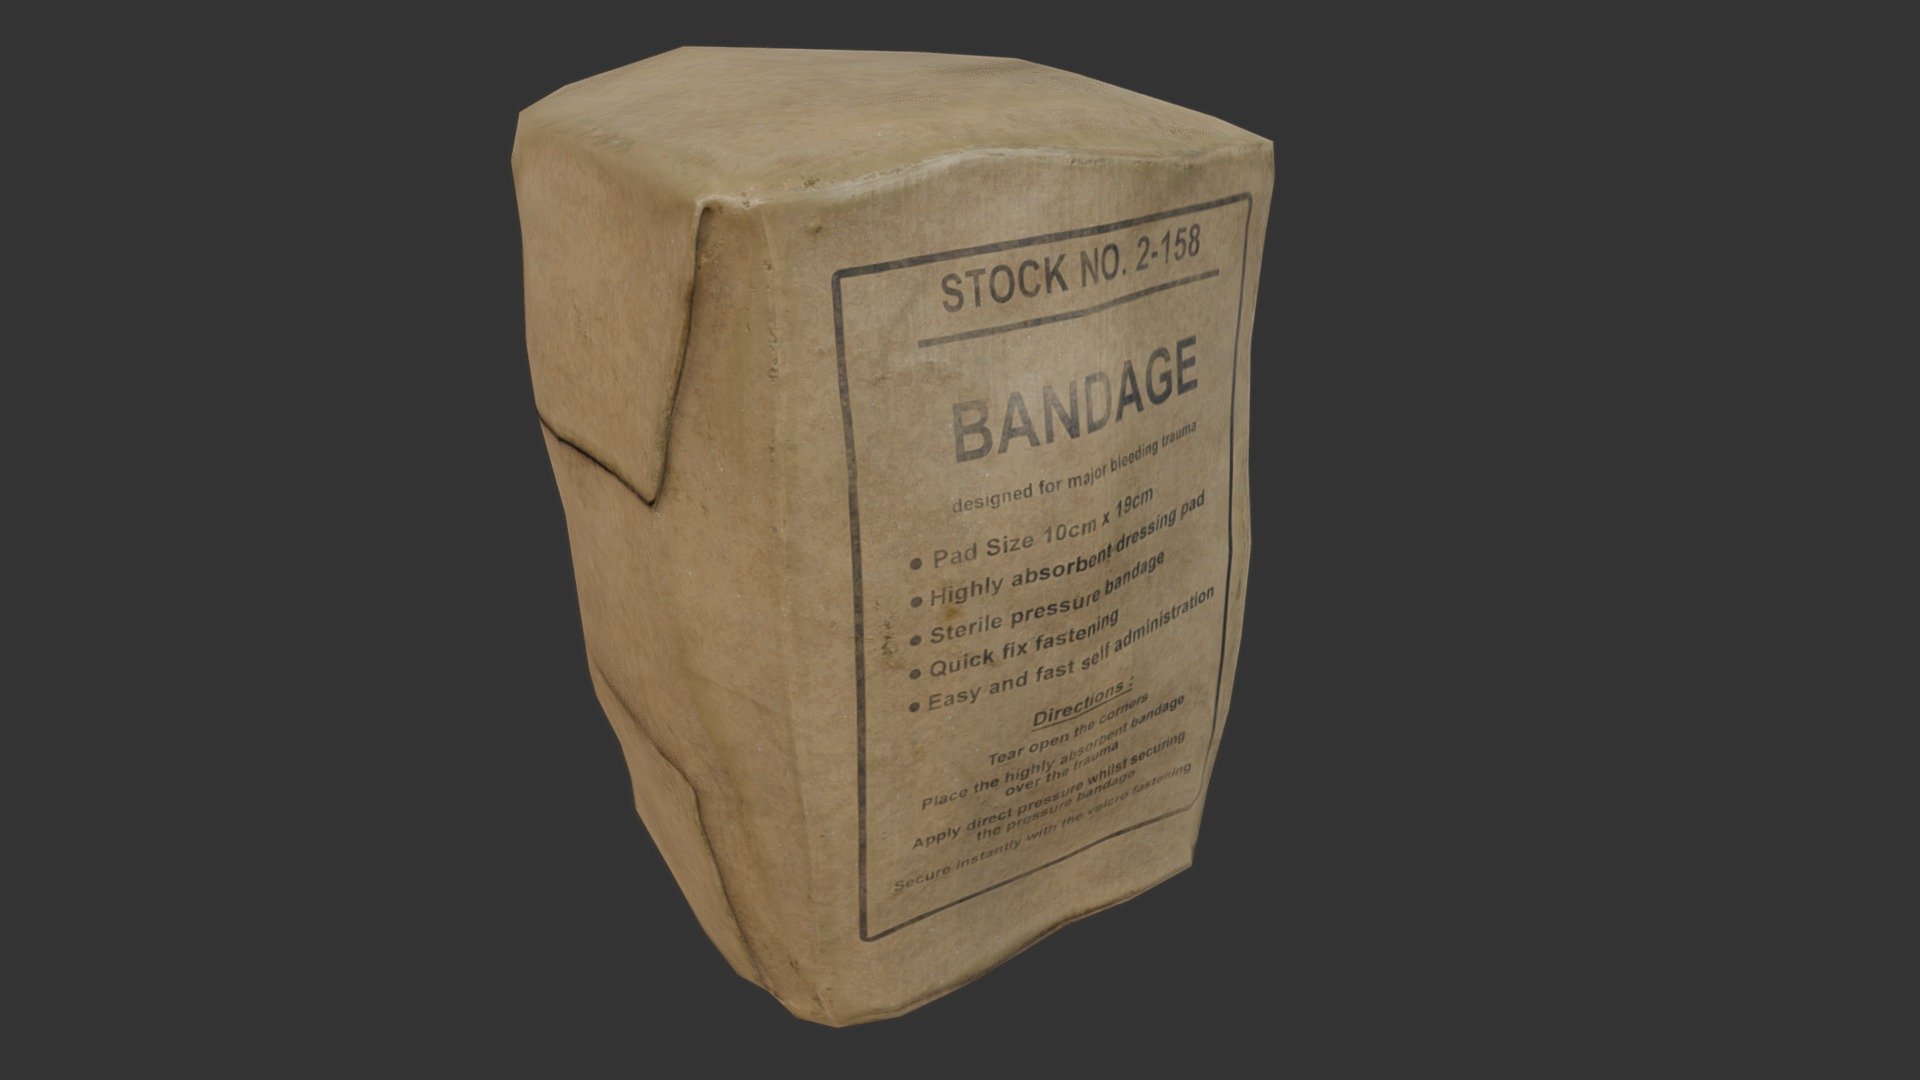 Field Bandage PBR

Very Detailed Low Poly Bandage / Gauze with High-Quality PBR Texturing. 

Fits perfect for any PBR game such as First Aid og Decoration

Sculpting done in Zbrush and Retopologized, High Poly mesh Baked
and PBR Painted .

Standard Textures
Base Color, Metallic, Roughness, Height, AO, Normal, Maps

Unreal 4 Textures
Base Color, Normal, OcclusionRoughnessMetallic

Unity 5/2017 Textures
Albedo, SpecularSmoothness, Normal, and AO Maps

2048x2048 TGA Textures

Please Note, this PBR Textures Only. 

Low Poly Triangles 

476 Tris
240 Verts

File Formats :

.Max2018
.Max2017
.Max2016
.Max2015
.FBX
.OBJ
.3DS
.DAE - Field Bandage PBR - Buy Royalty Free 3D model by GamePoly (@triix3d) 3d model